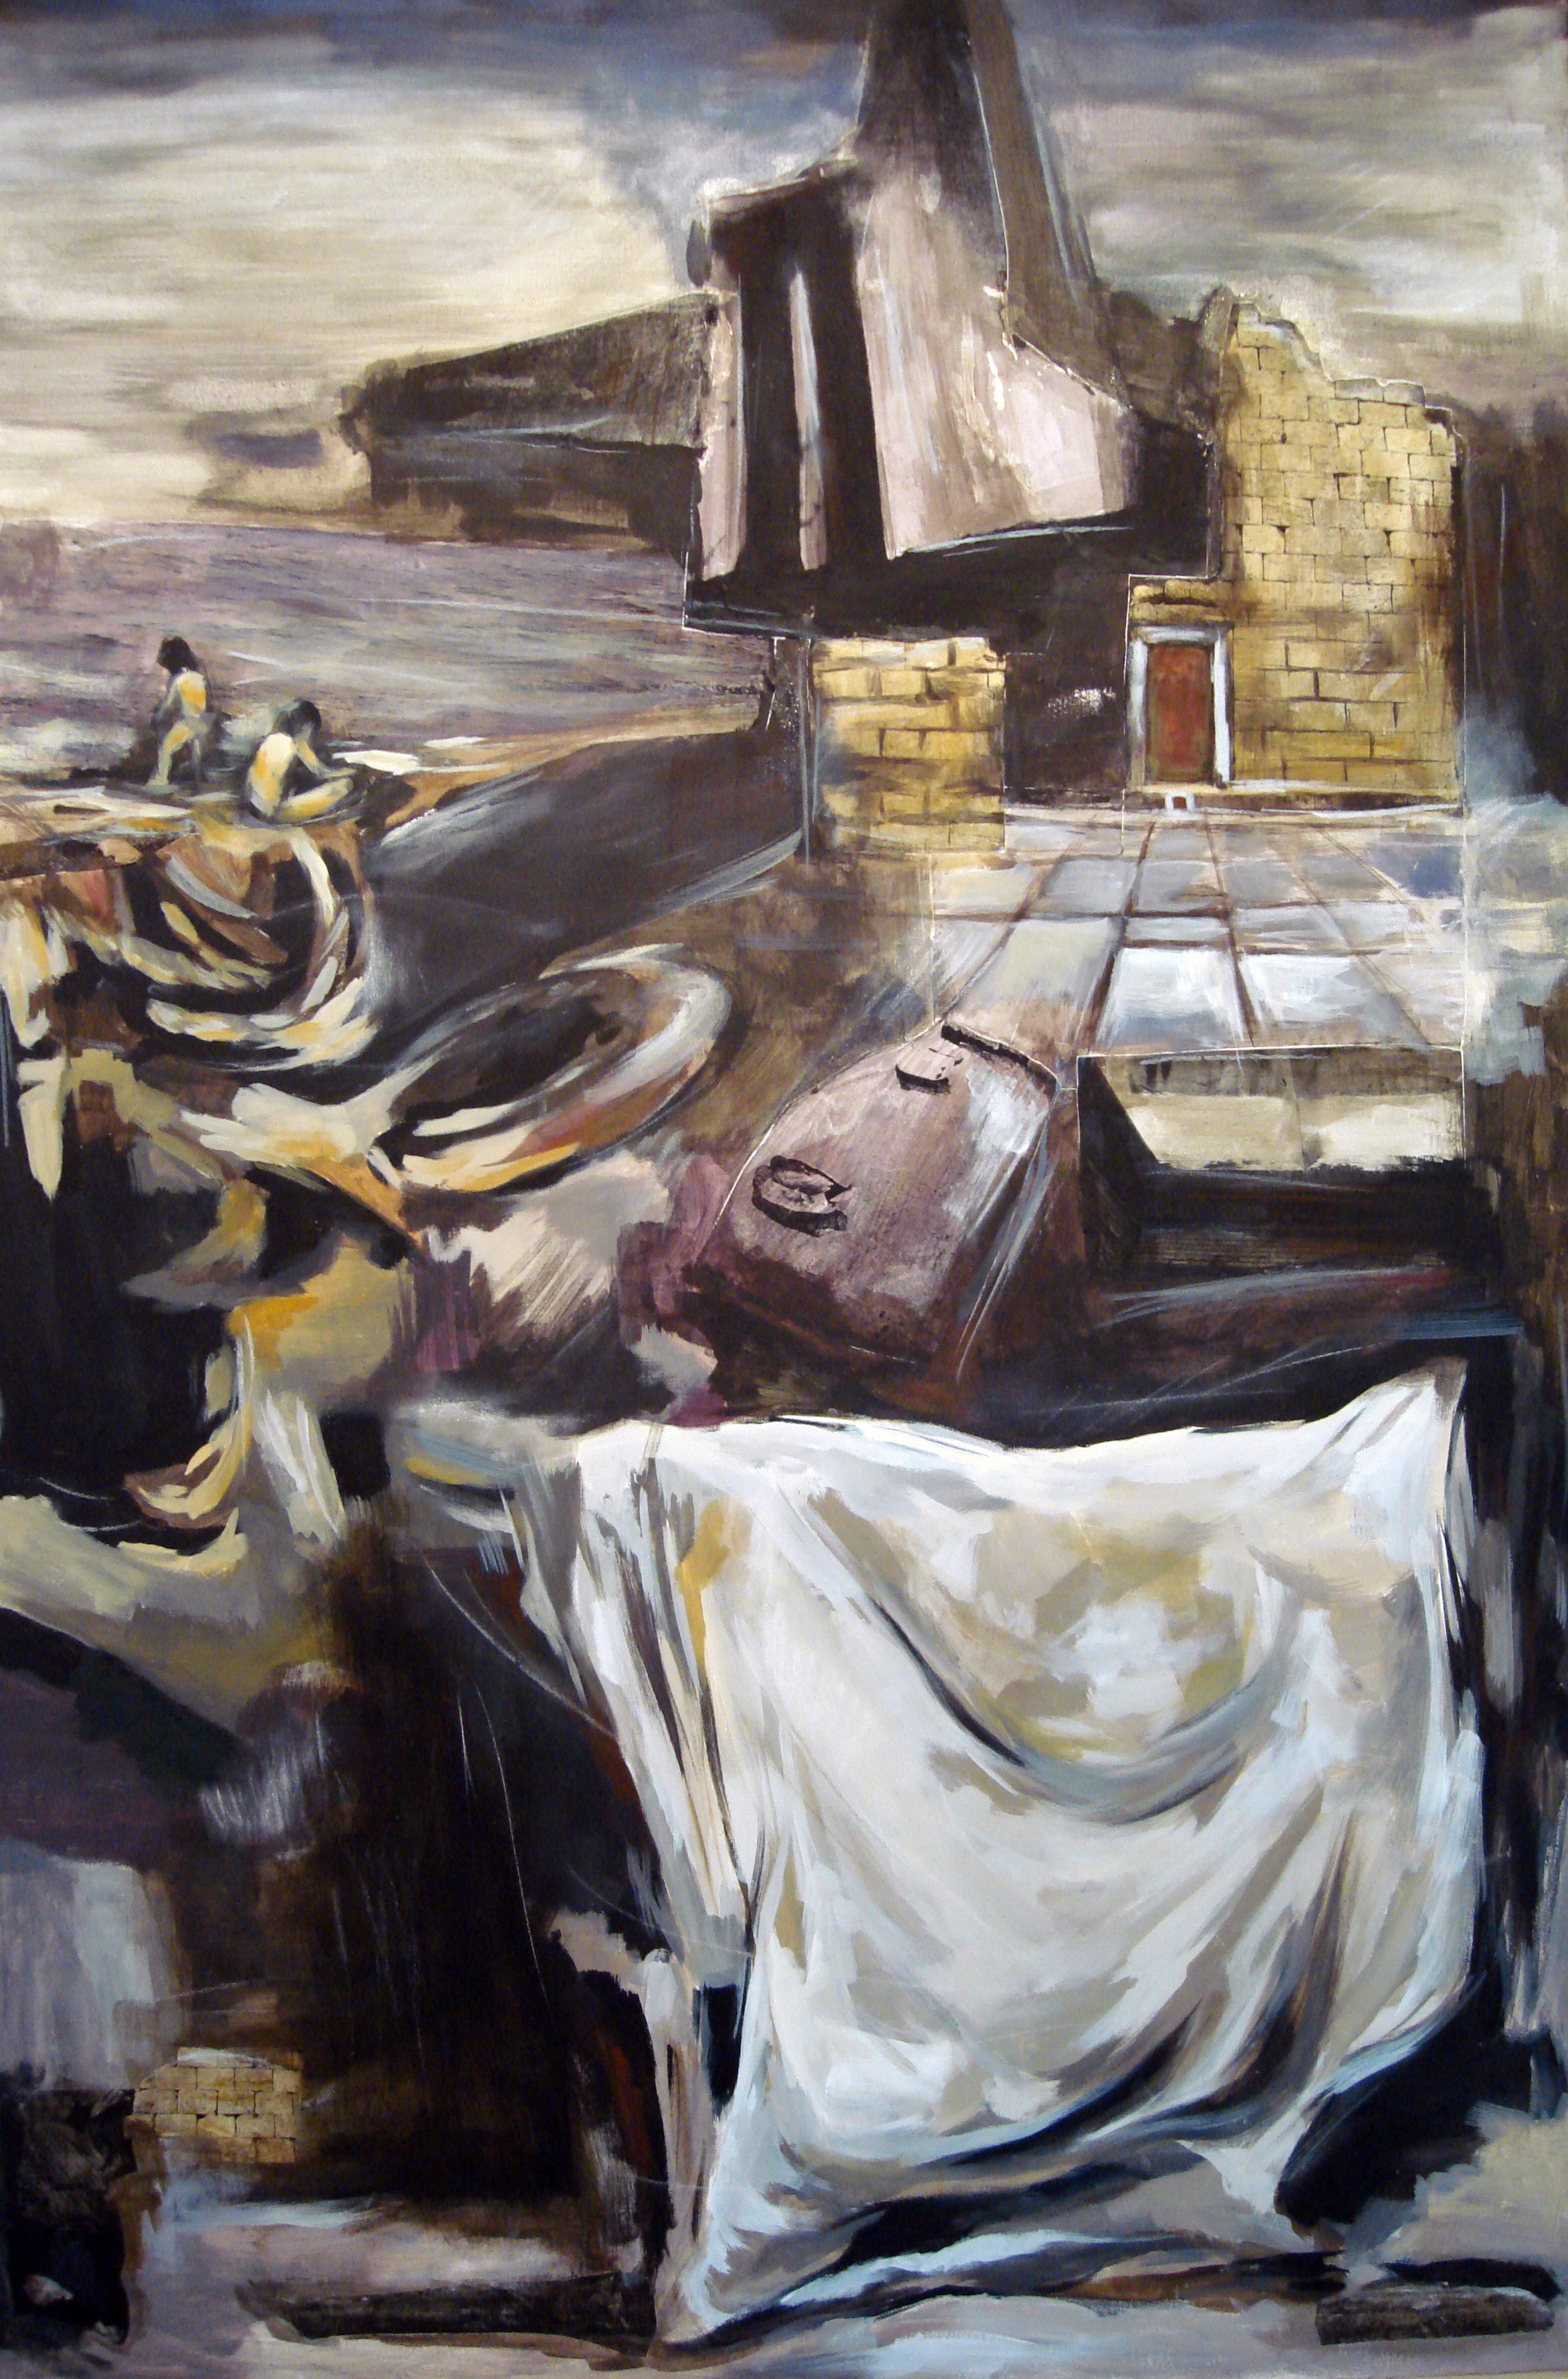 Far-Away, mixed media on canvas, 47x31 inches, 2008